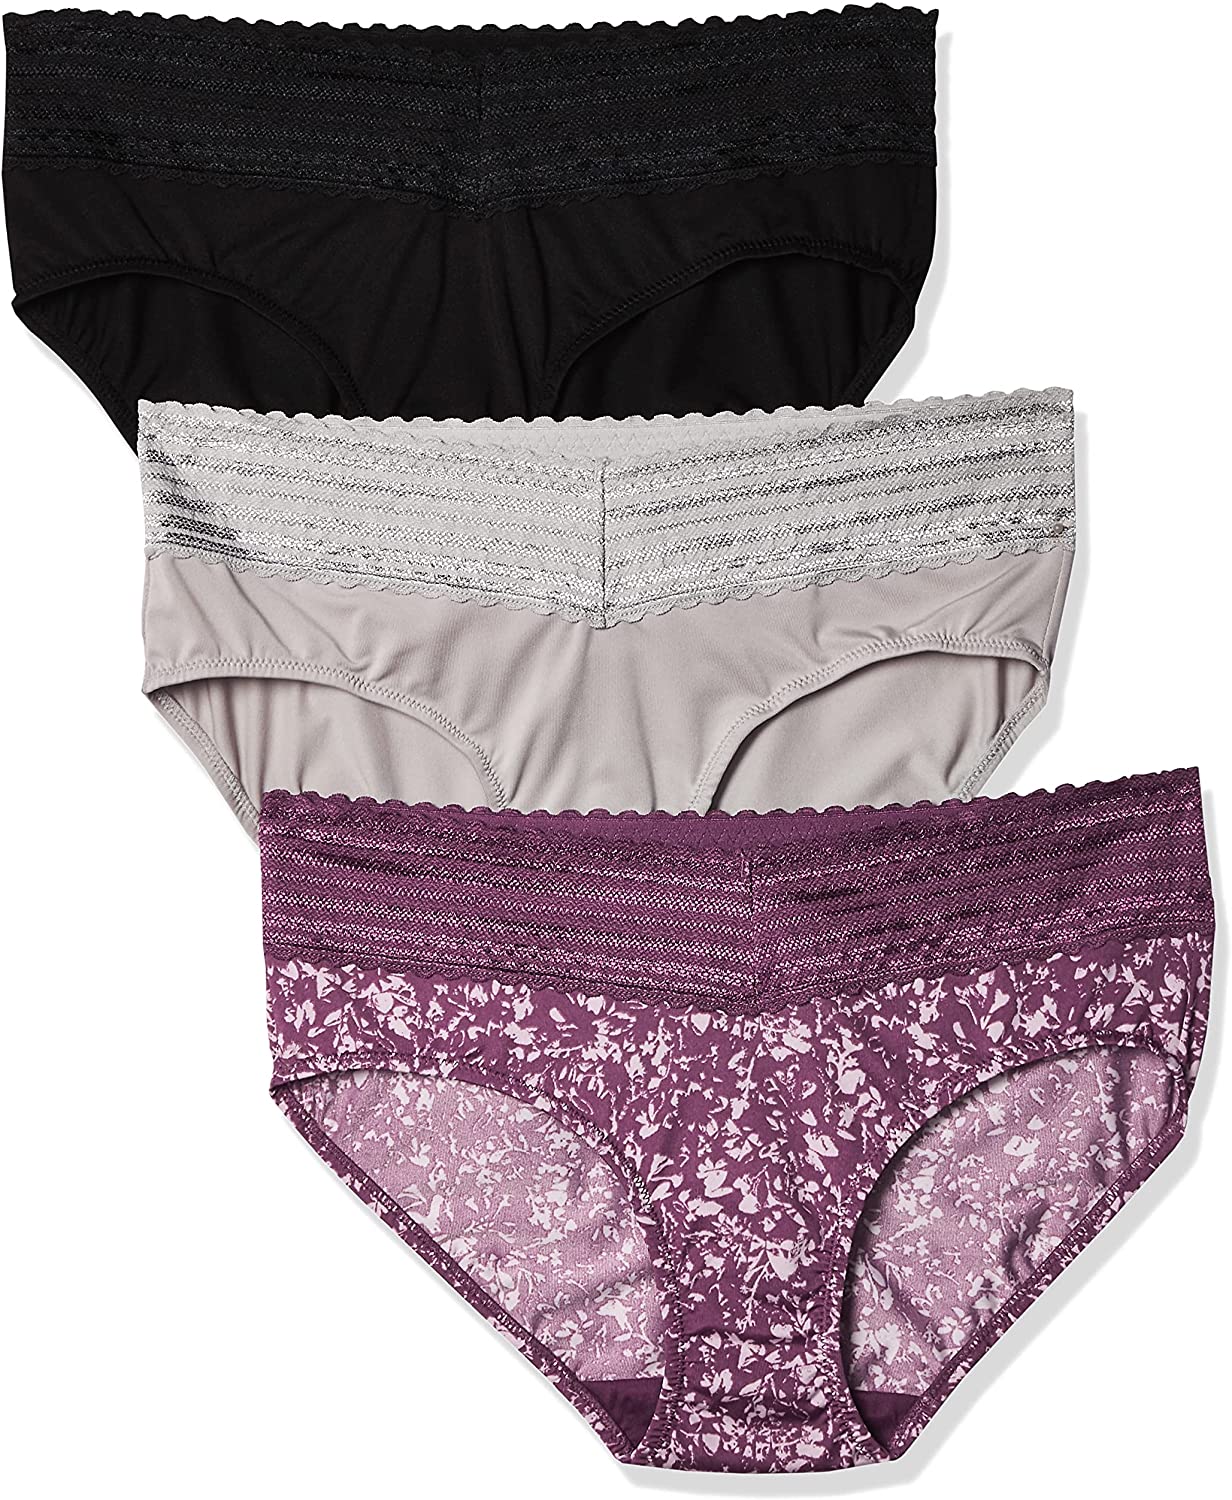  Warners Womens Blissful Benefits No Muffin 3 Pack Panty  Briefs